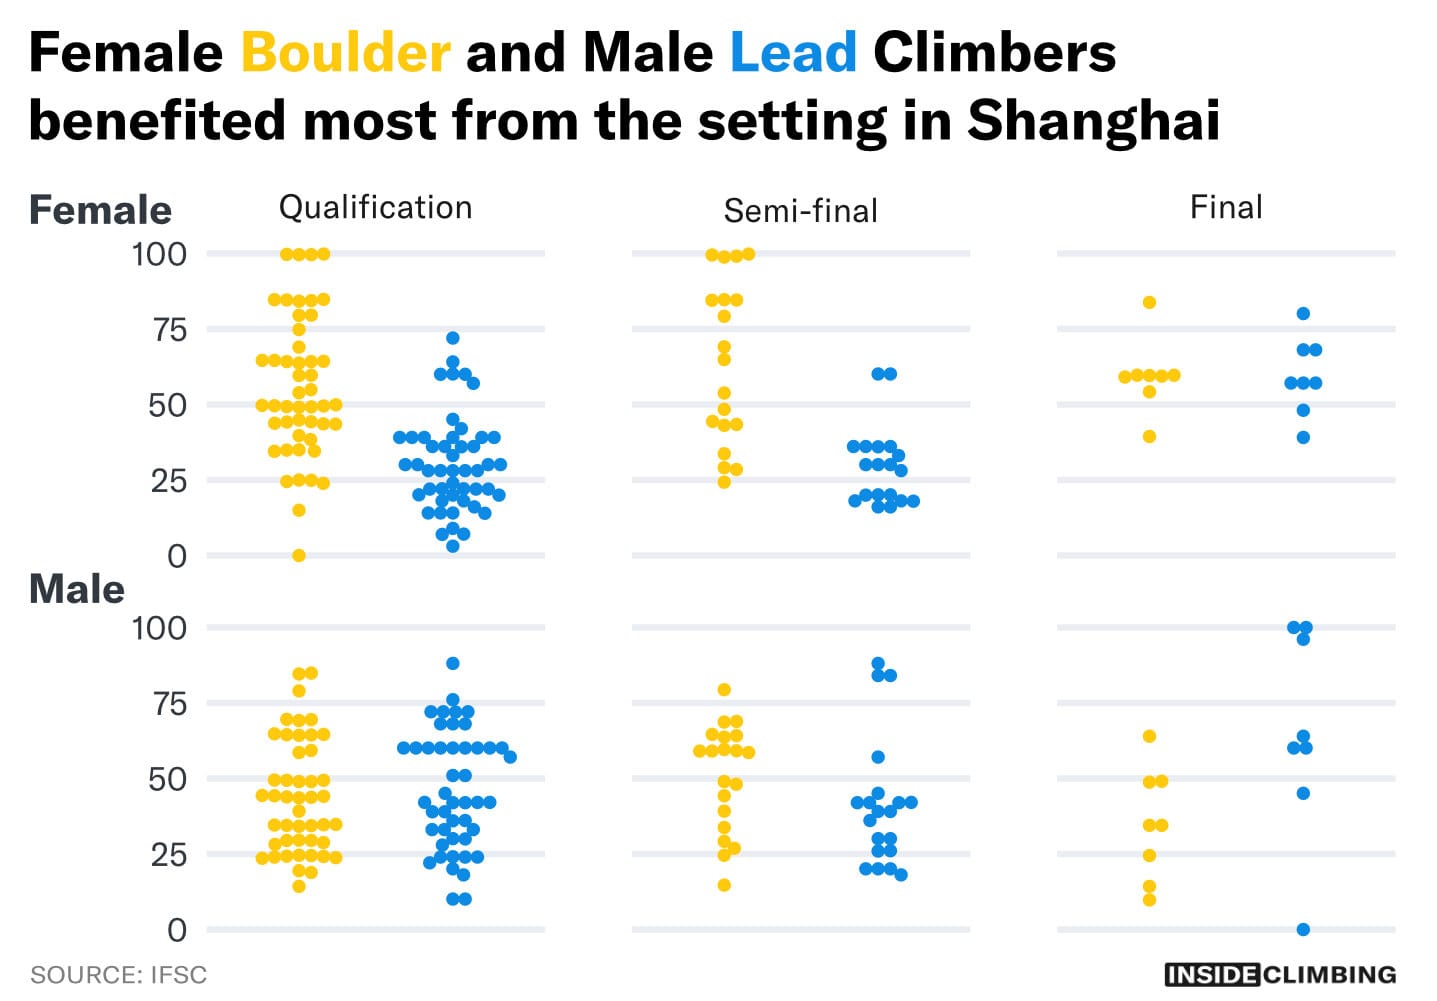 Beeswarm chart of the distribution of scores across male and female climbers. Again female boulderers and male lead climbers have higher scores.